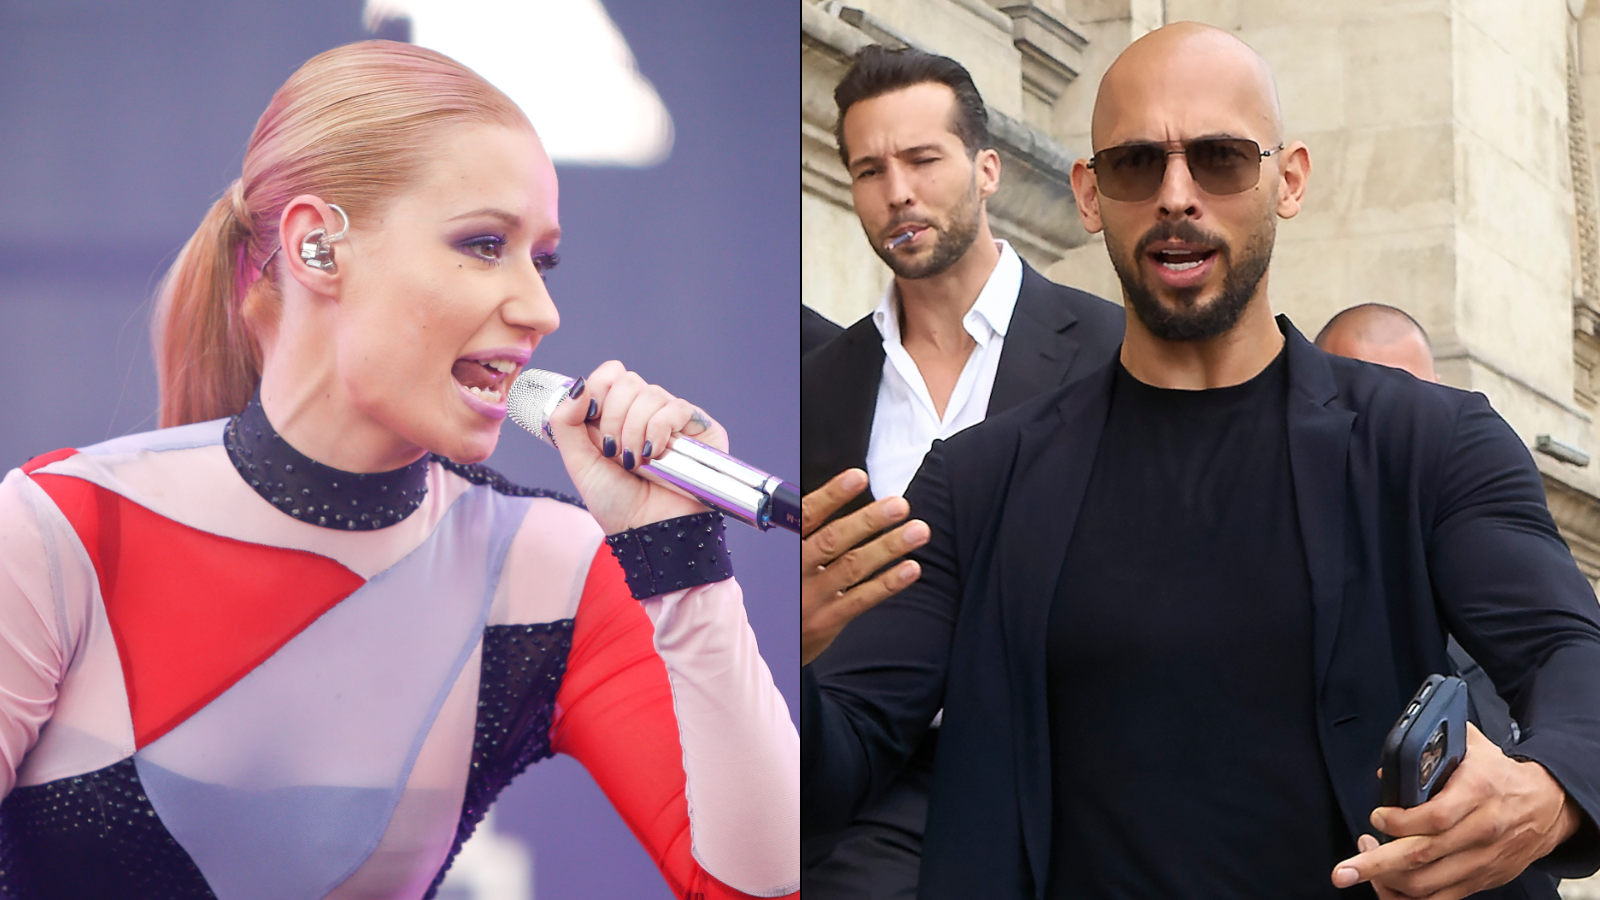 This Week on Crypto Twitter: Iggy Azalea and Andrew Tate Duel in Meme Coin Battle